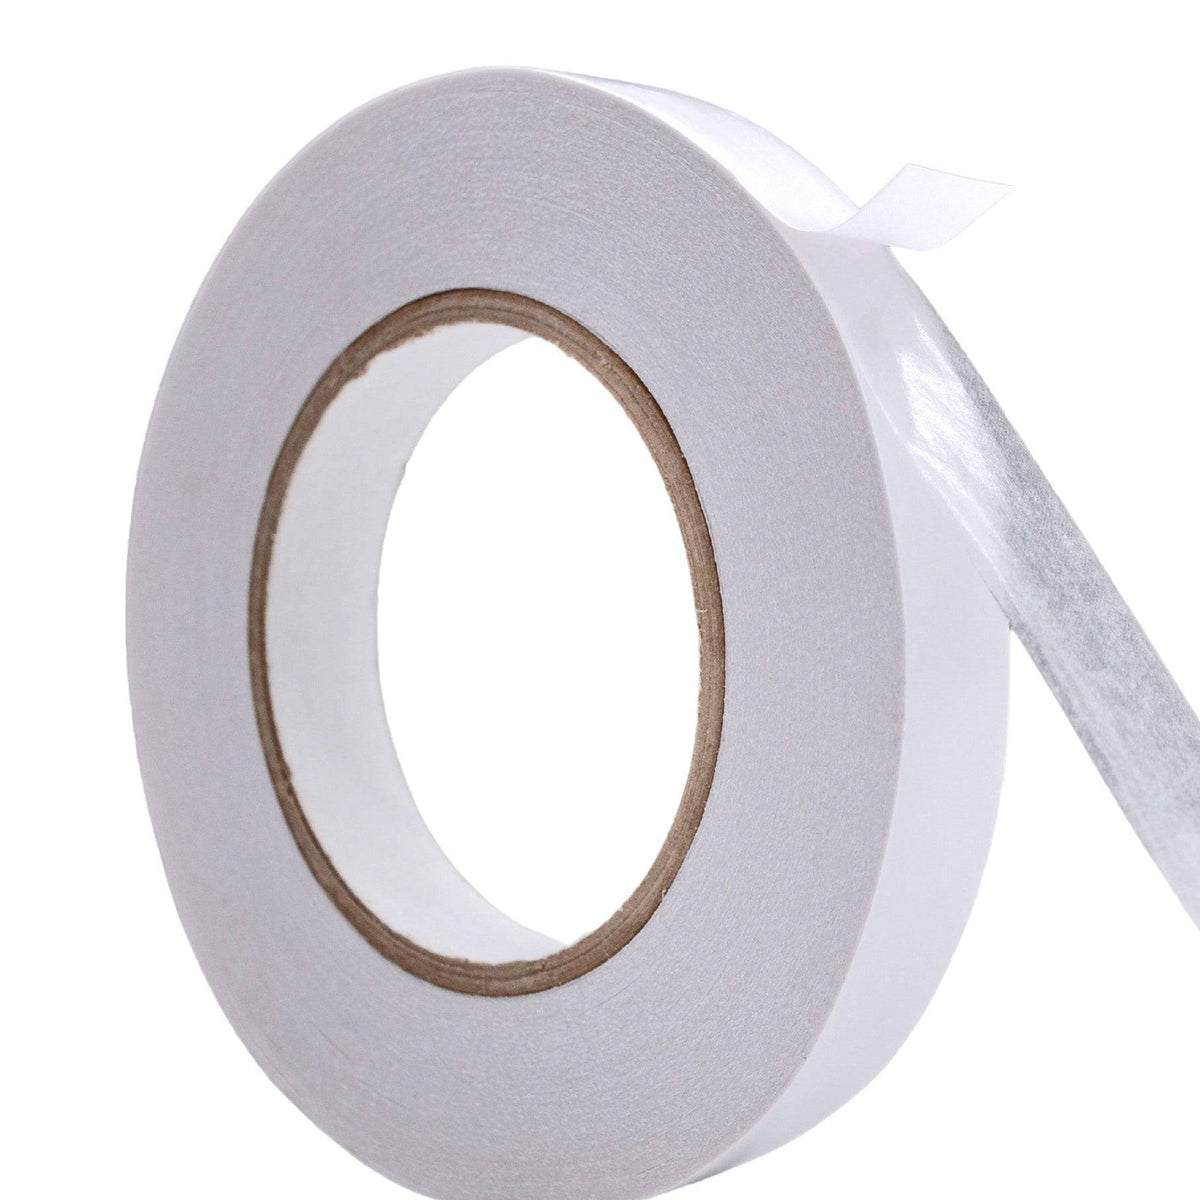 Double Side Tape Scrapbooking Adhesive  Double Sided Tape Scrapbooking -  8m White - Aliexpress